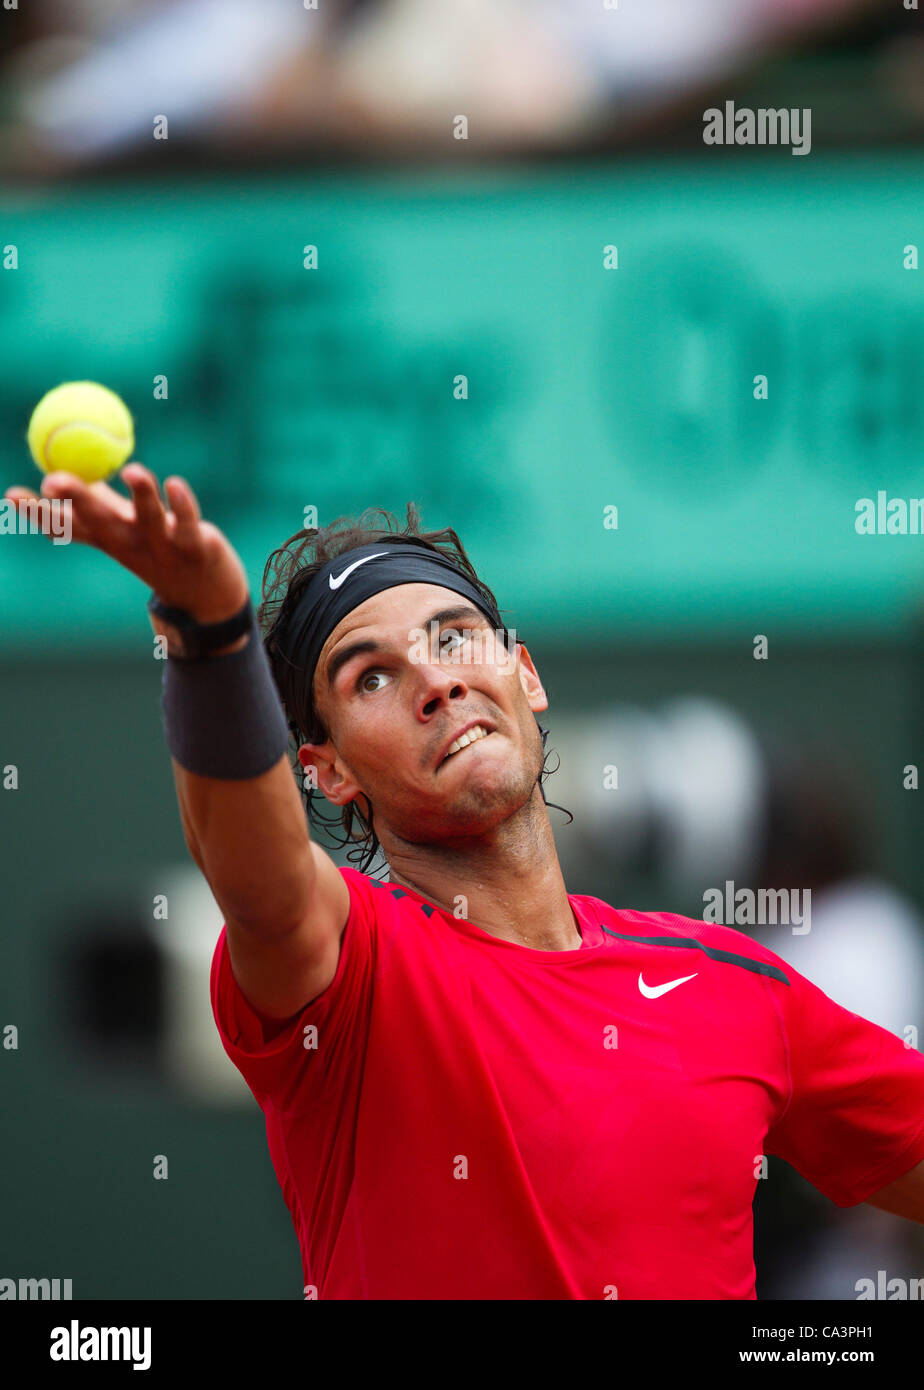 02.06.2012 Paris, France. Rafael Nadal in action against Eduardo Schwank on day 7 of the French Open Tennis from Roland Garros. Stock Photo